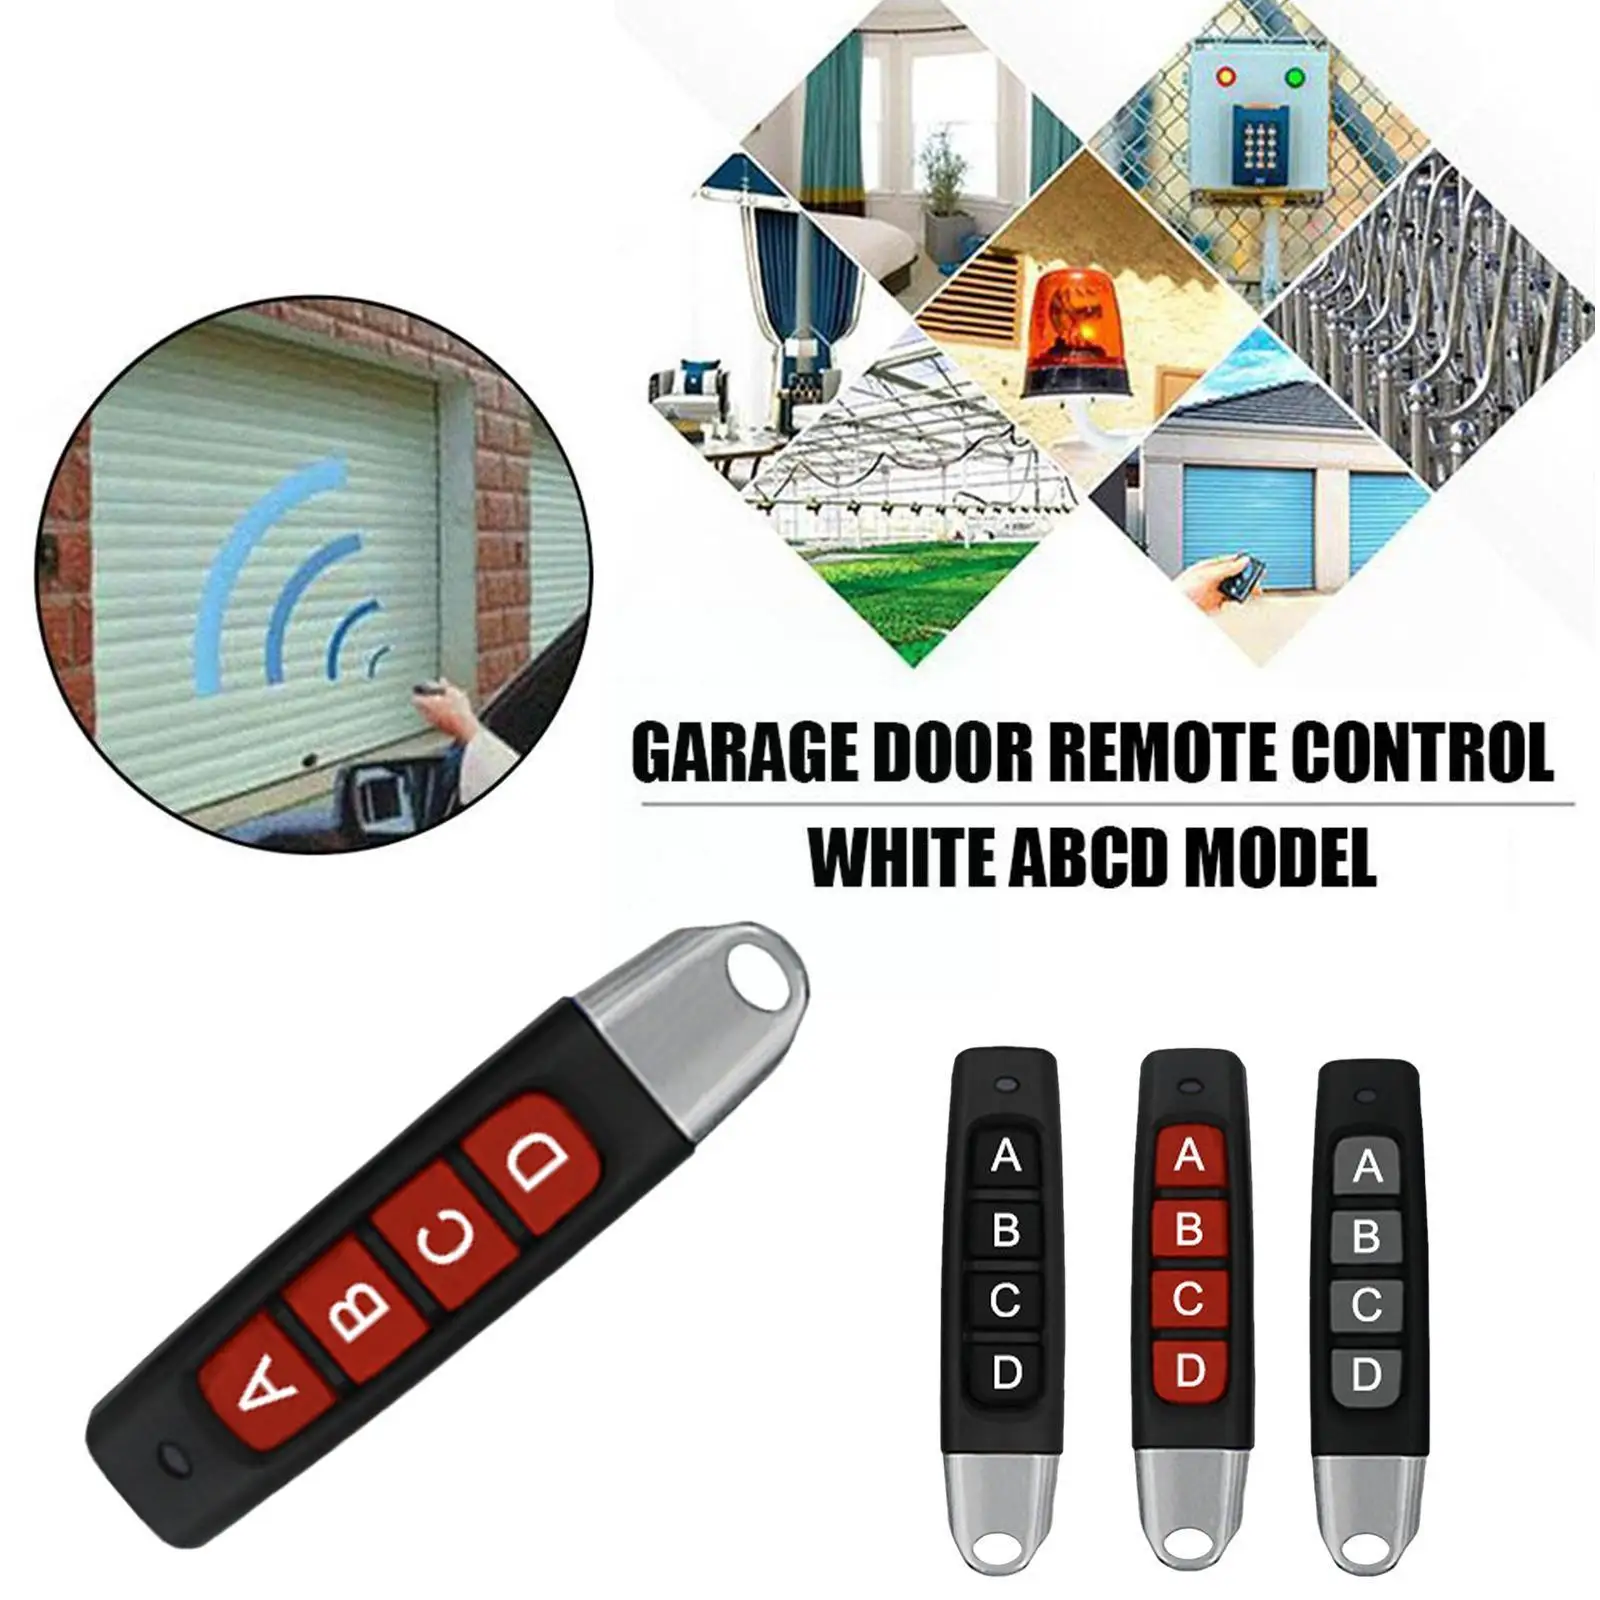 

433MHZ 433.92mhz Remote Control Garage Gate Door Opener Clone Control Remote Learning Duplicator Code Rolling